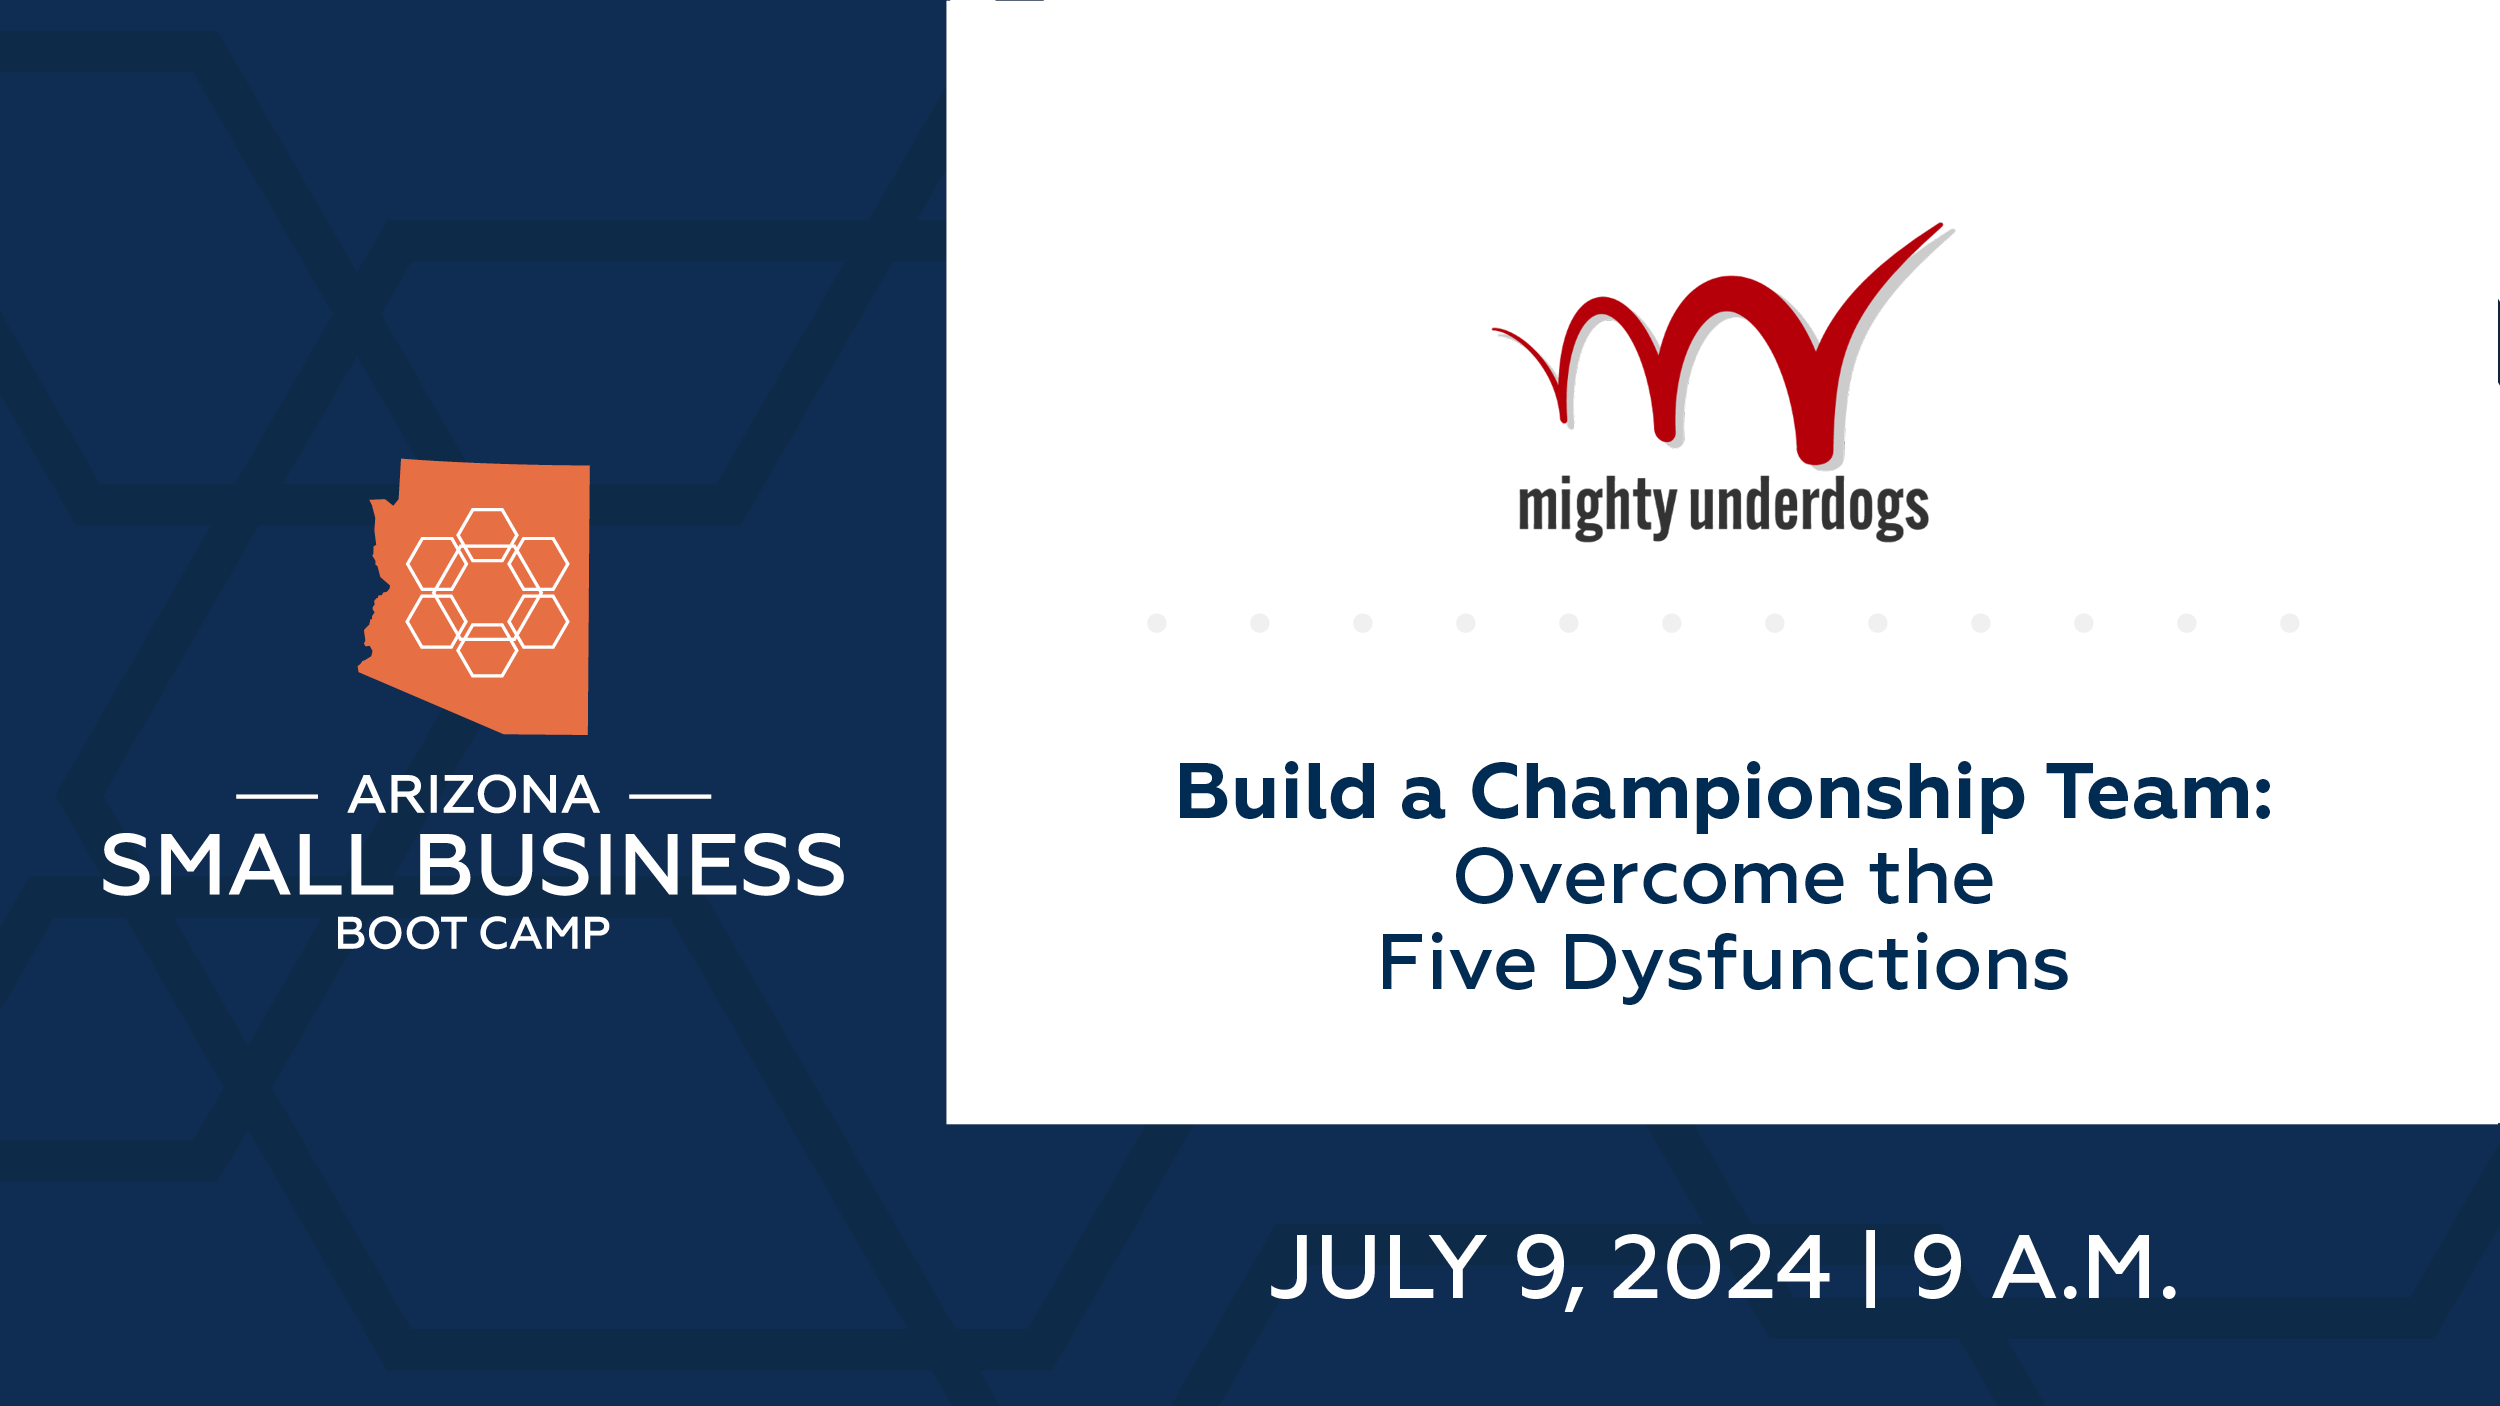 Build a Championship Team: Overcome the Five Dysfunctions 